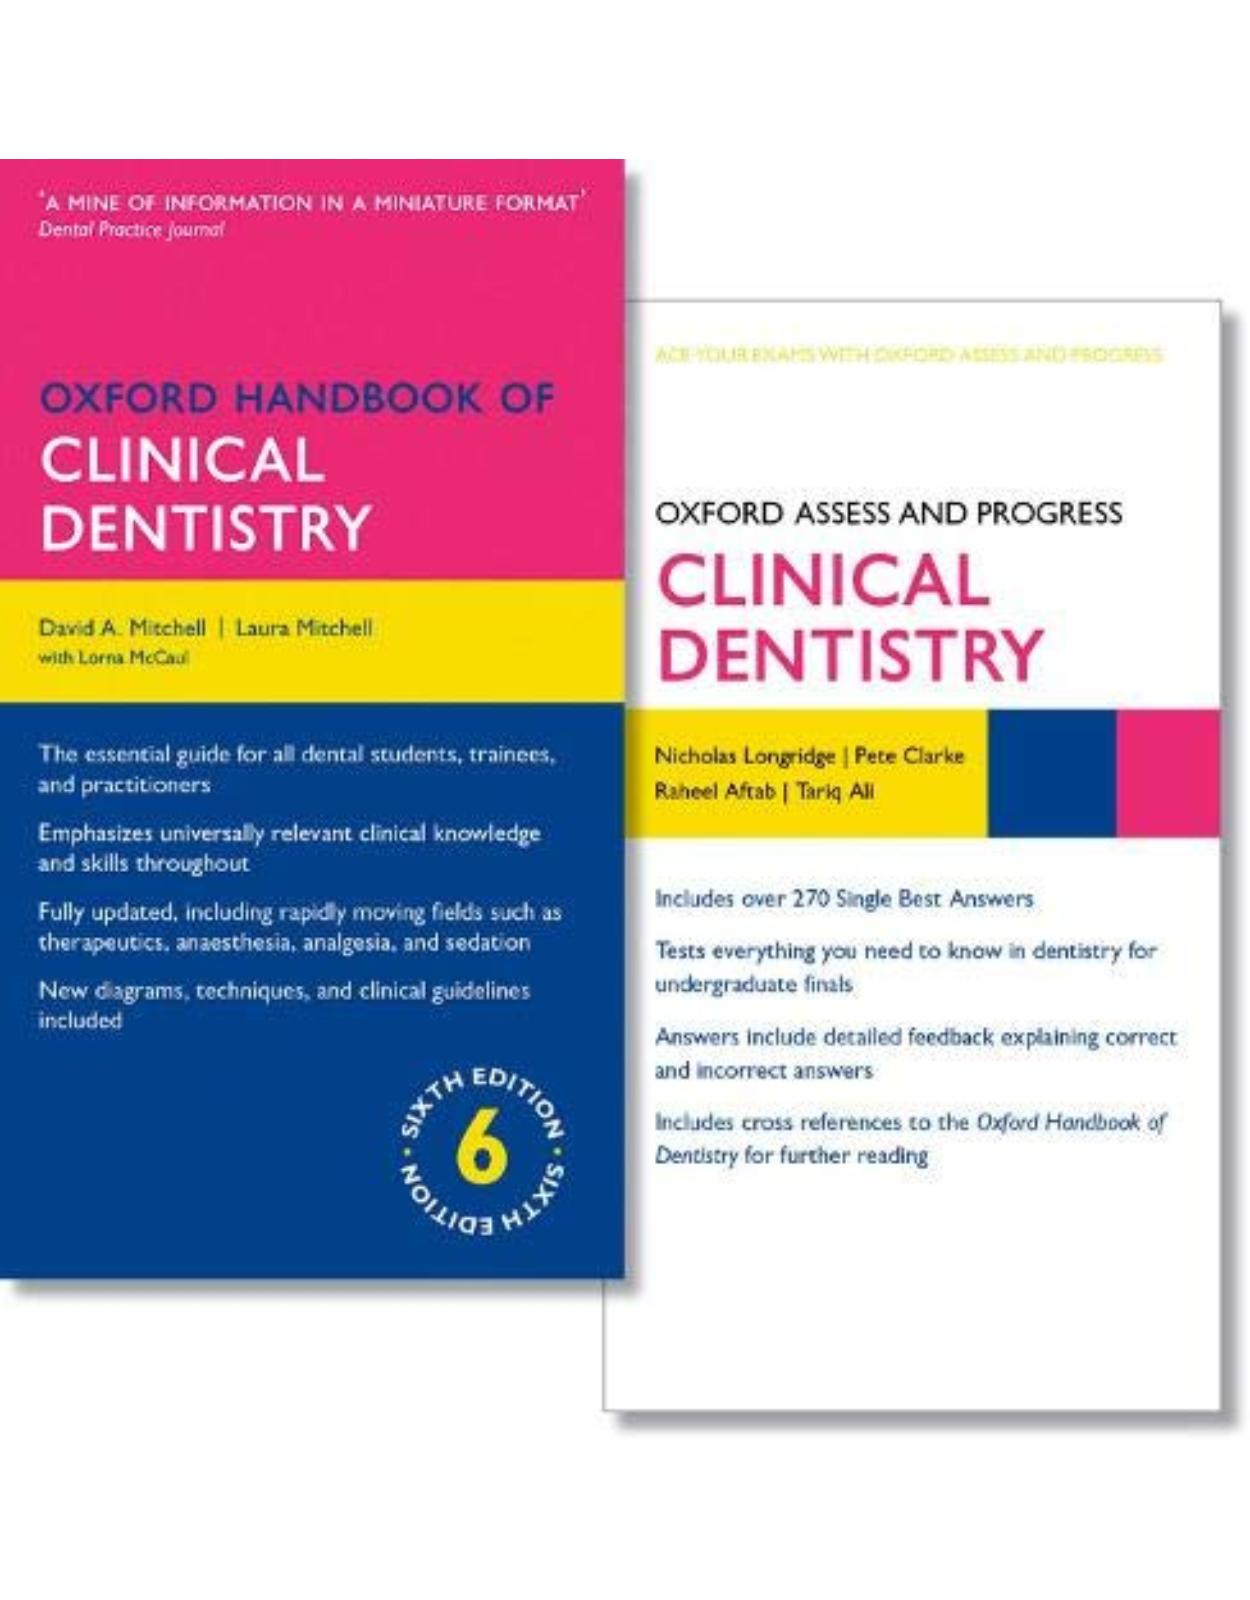 Oxford Handbook of Clinical Dentistry 6e and Oxford Assess and Progress: Clinical Dentistry 1e 